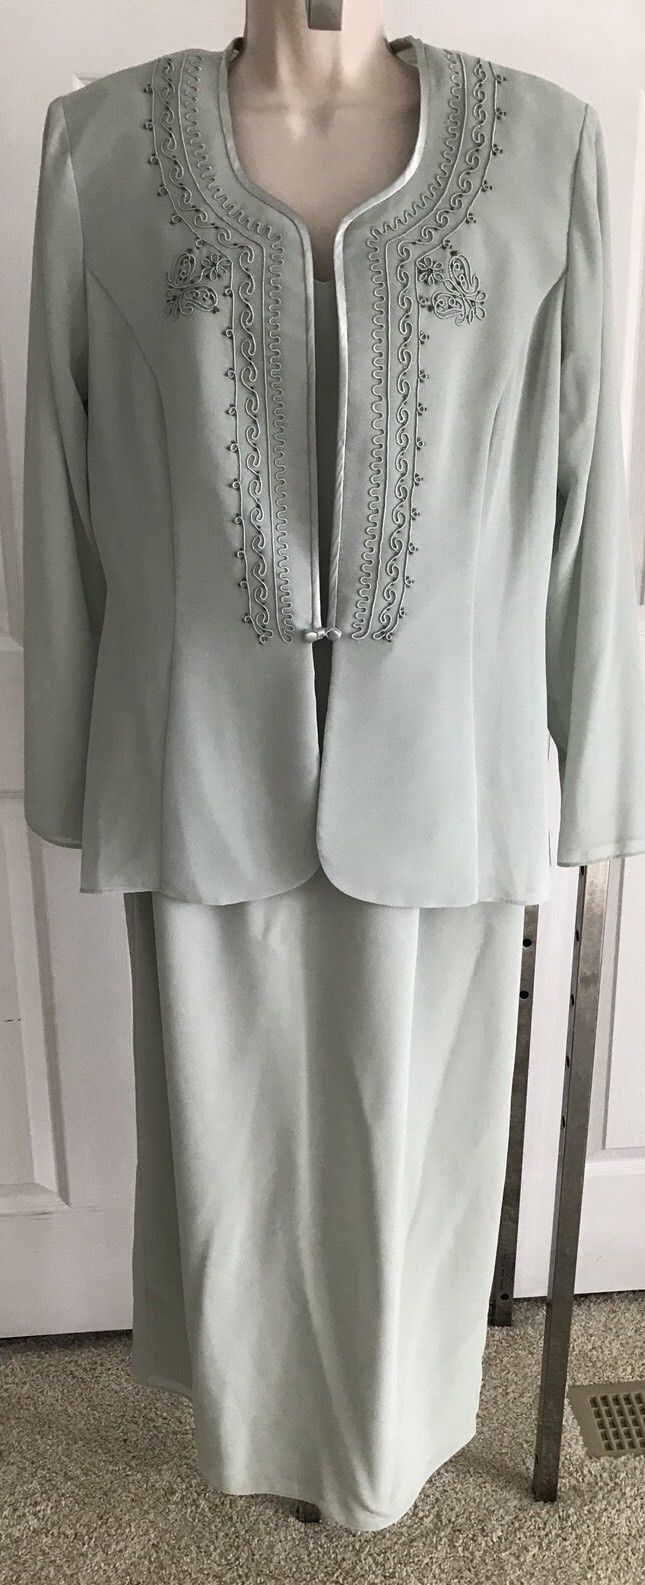 RM Richards NWT wedding party mint green gown jacket set suit 14